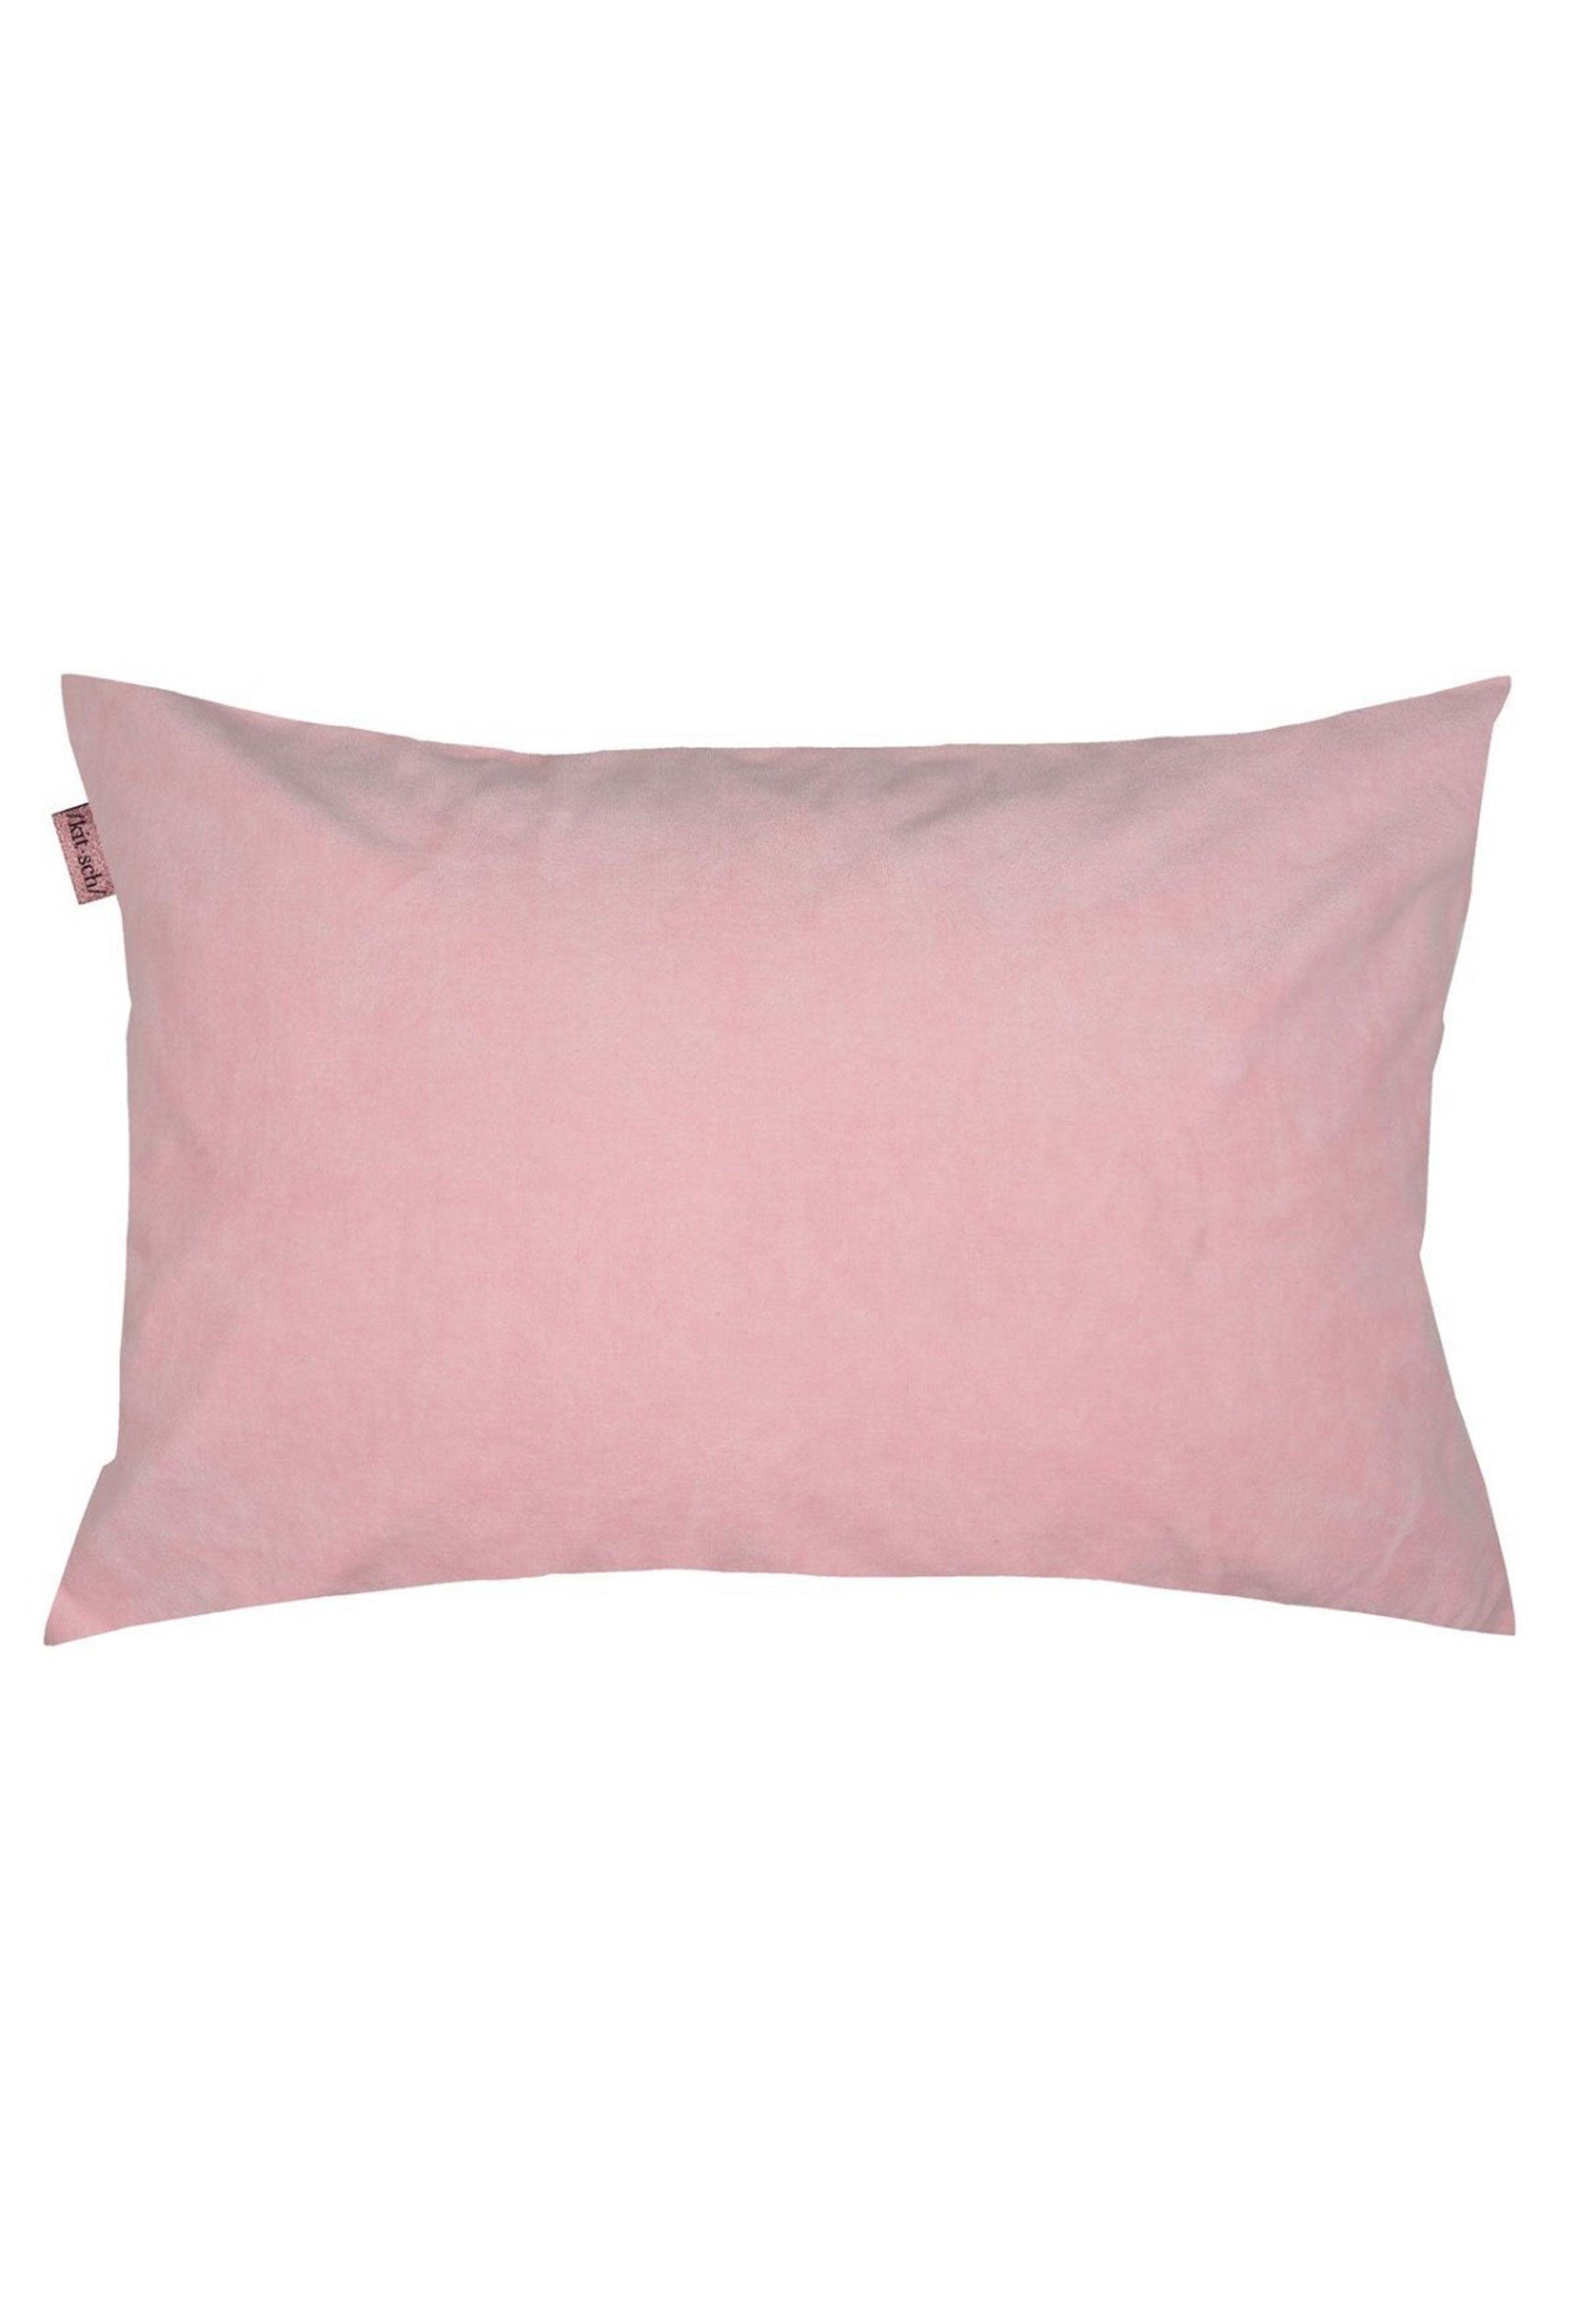 Kitsch Towel Pillow Cover in Blush, pink towel fabric pillowcase 